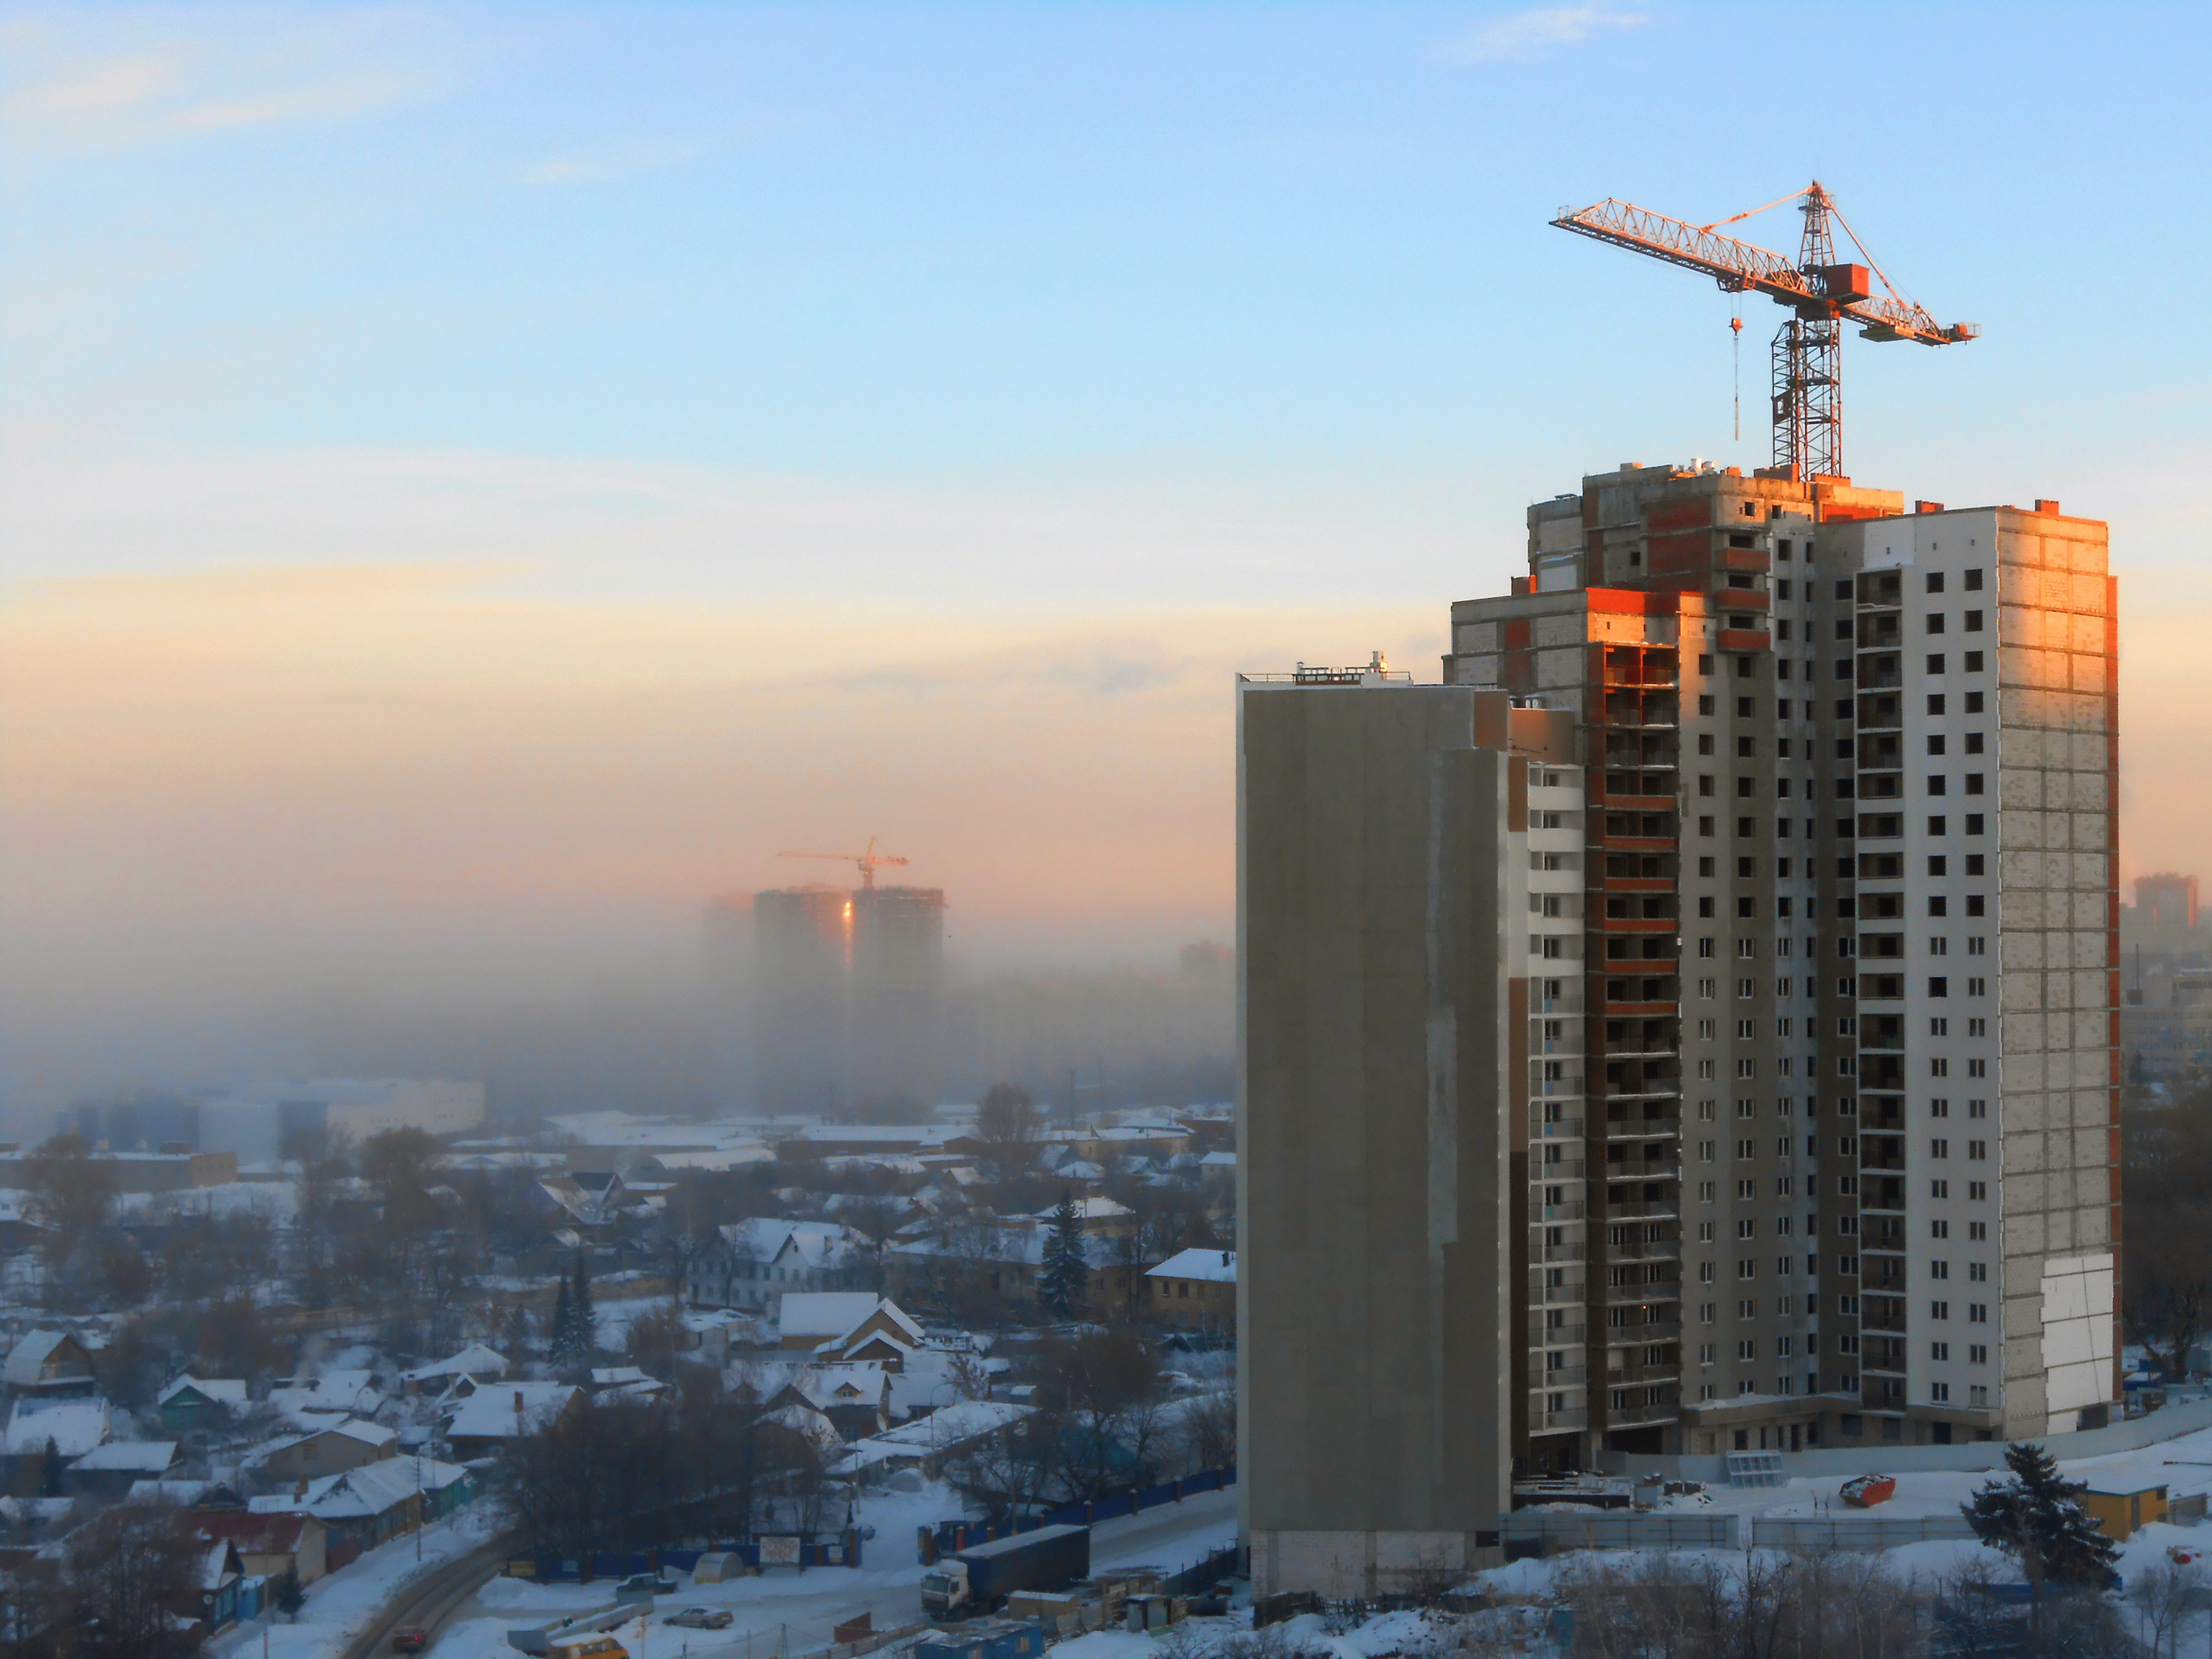 Cranes and buildings in fog photo